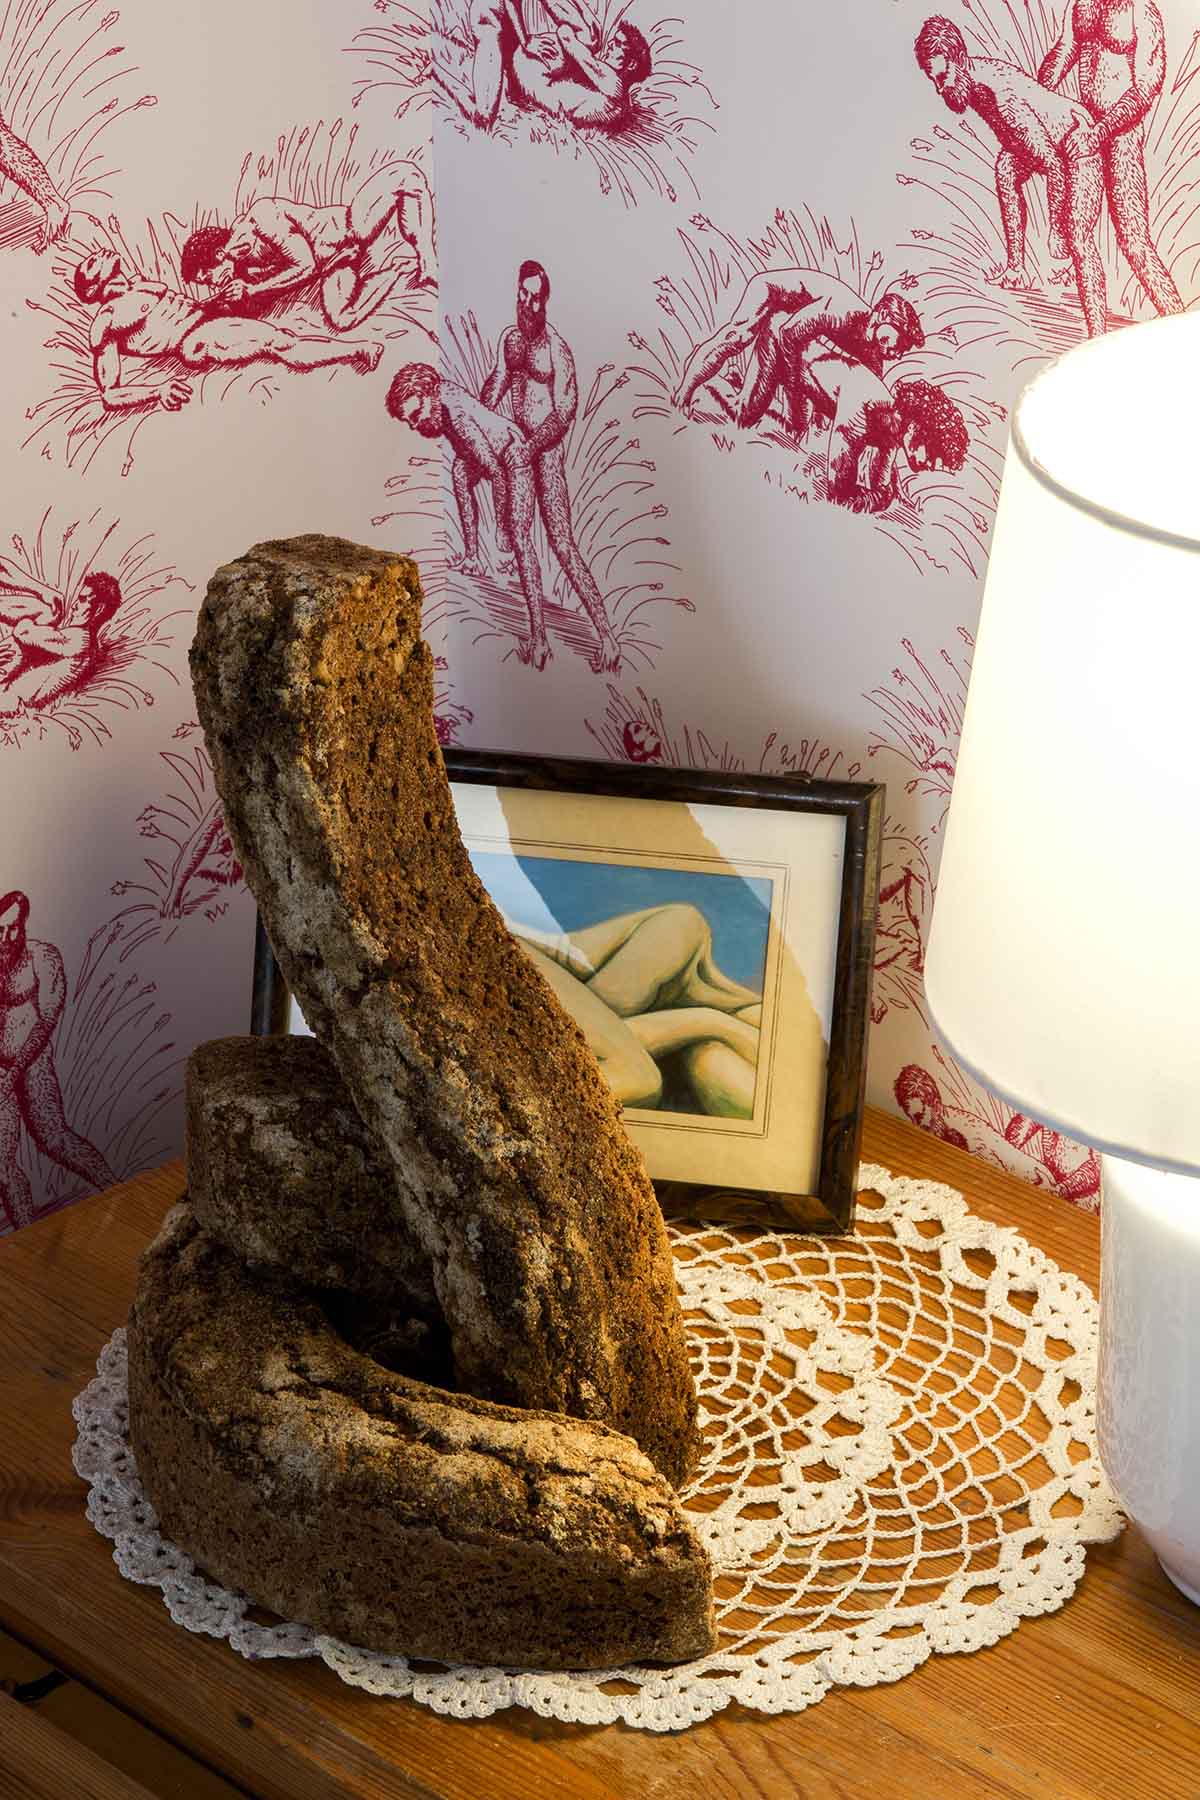 An image of a phallic loaf of bread on a wooden table.